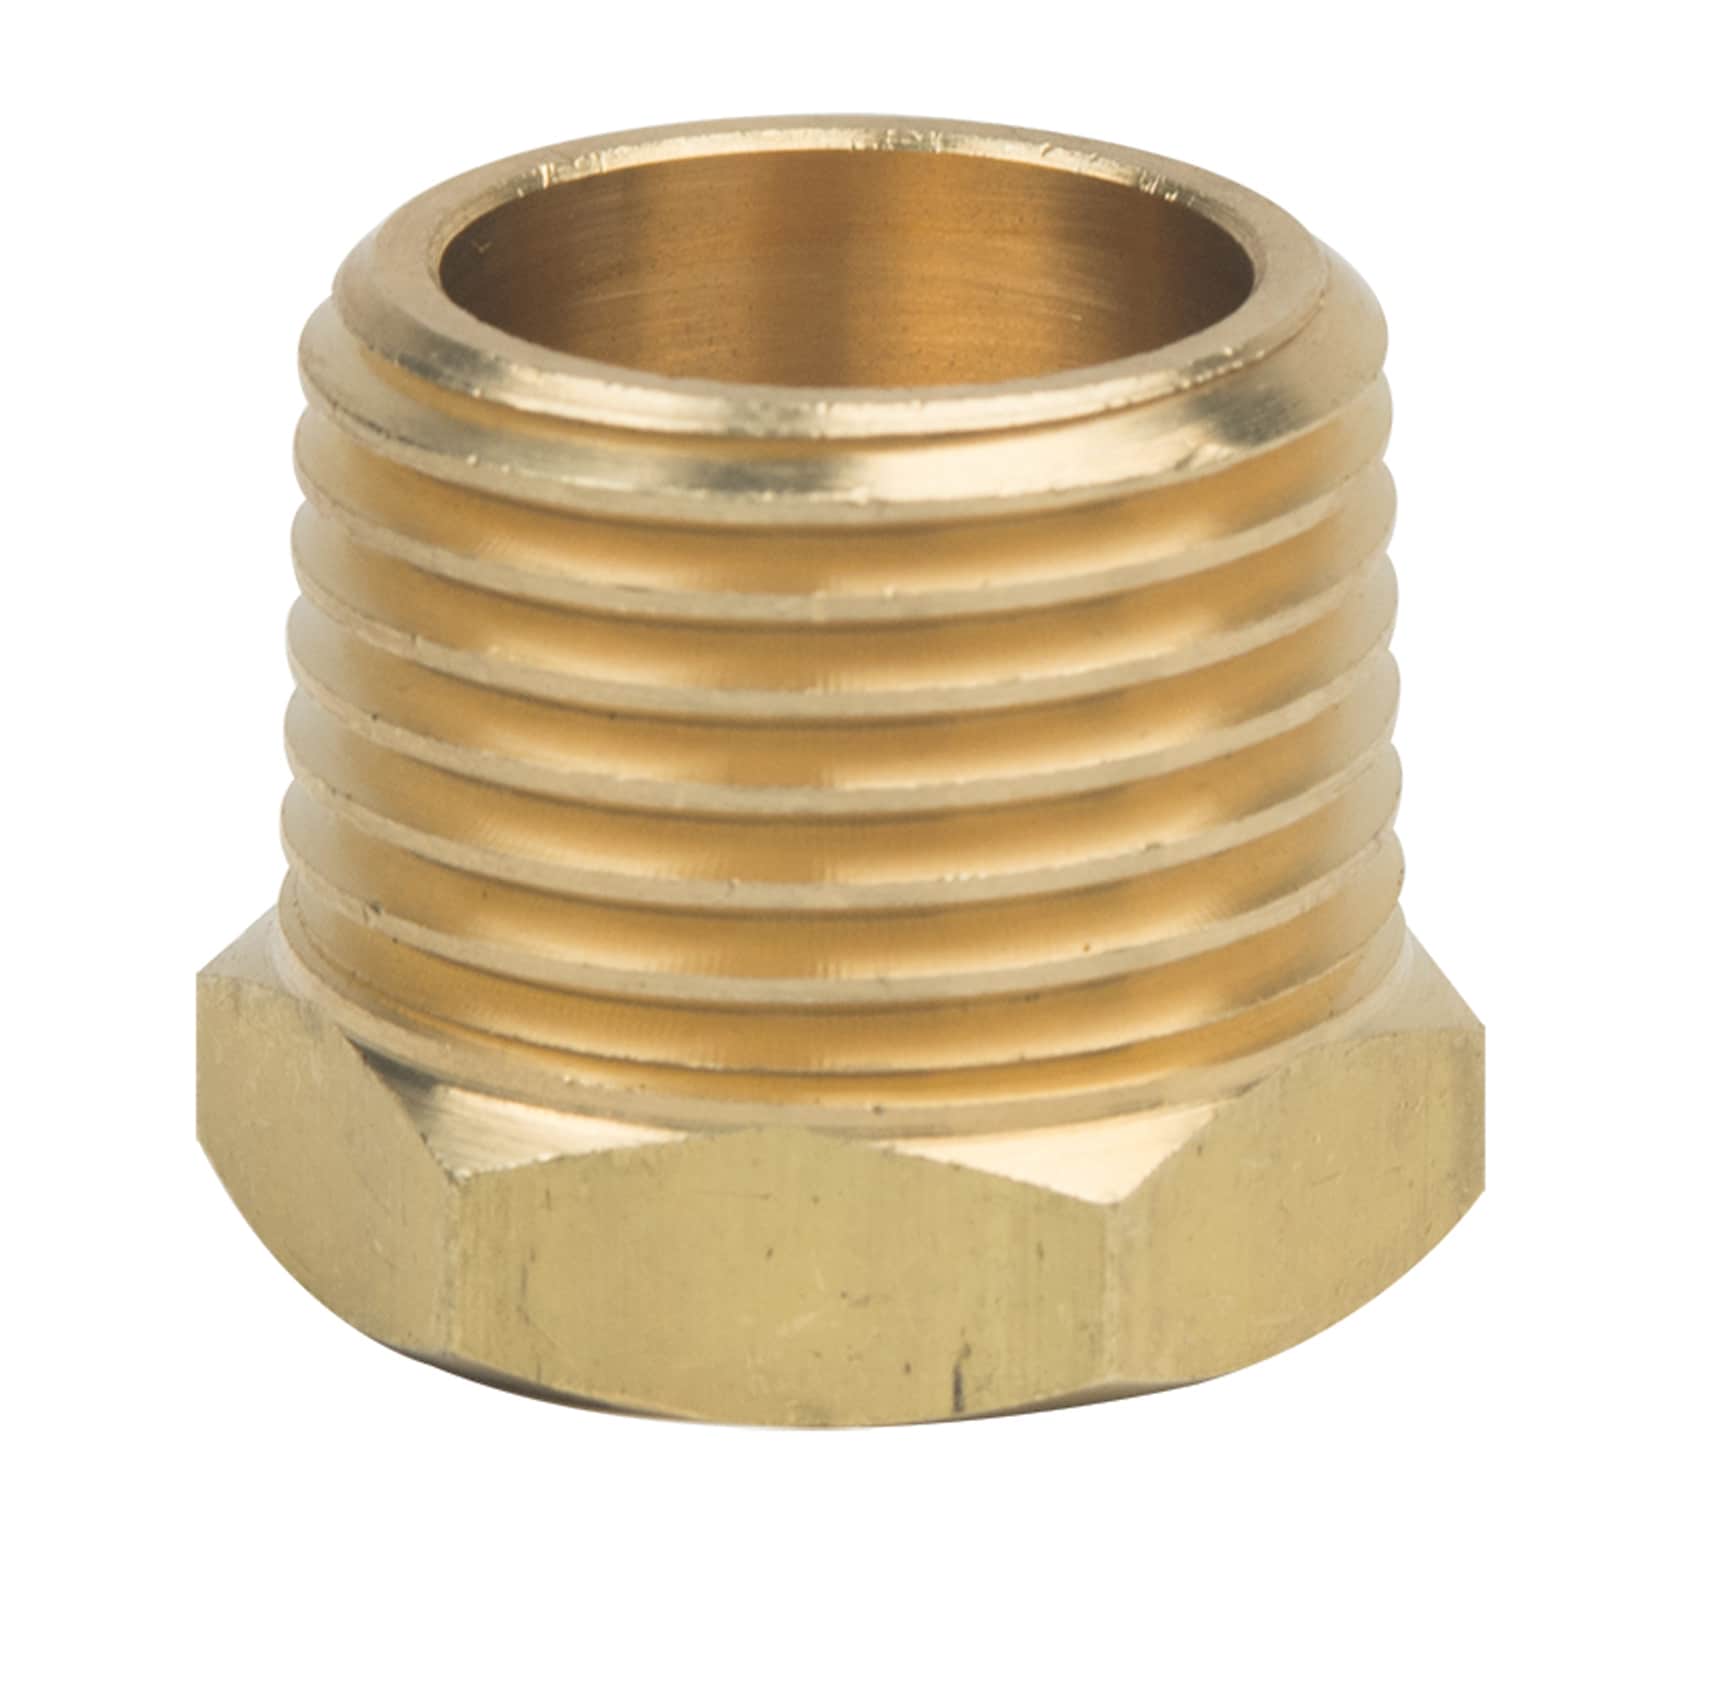 Reducer Metals Brass Threaded Pipe Fitting Hex Bushing 1/2" Male x 1/4" Female 